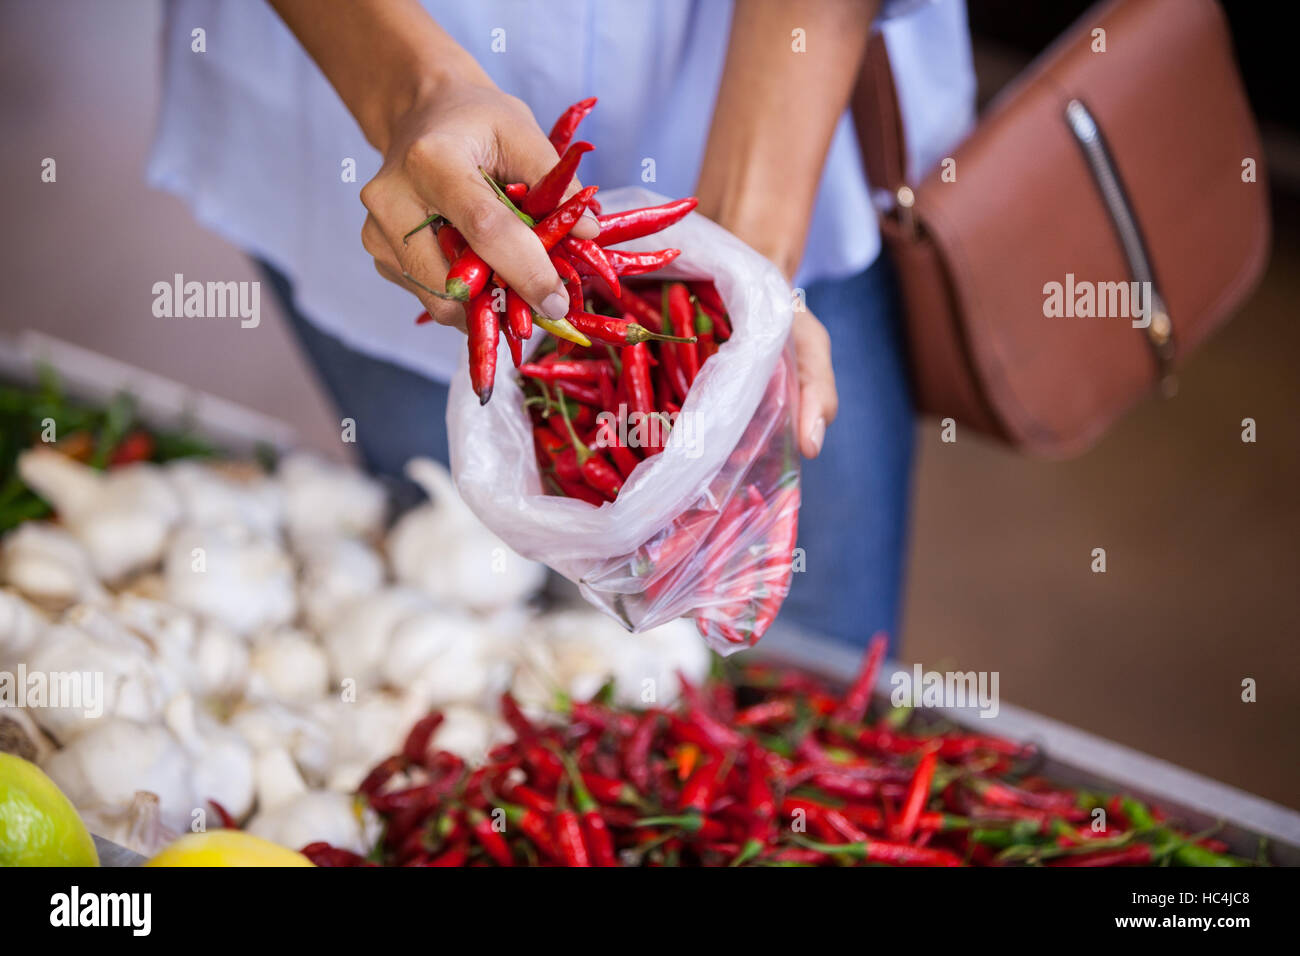 Woman buying red chilies Stock Photo